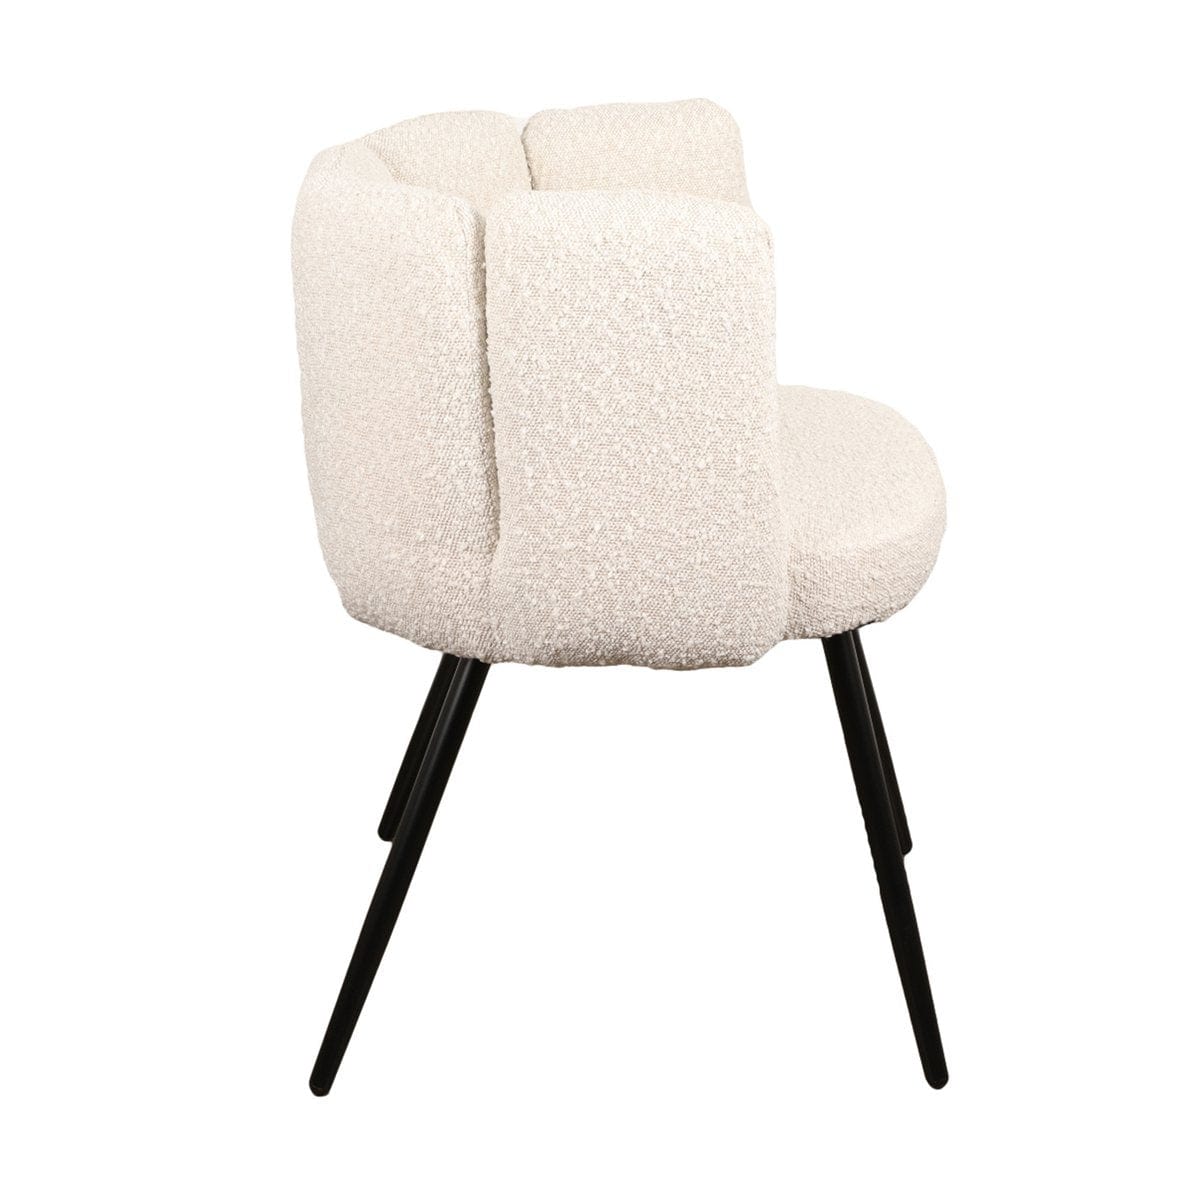 Pole To Pole High five chair white pearl (boucle) (Set of 2)